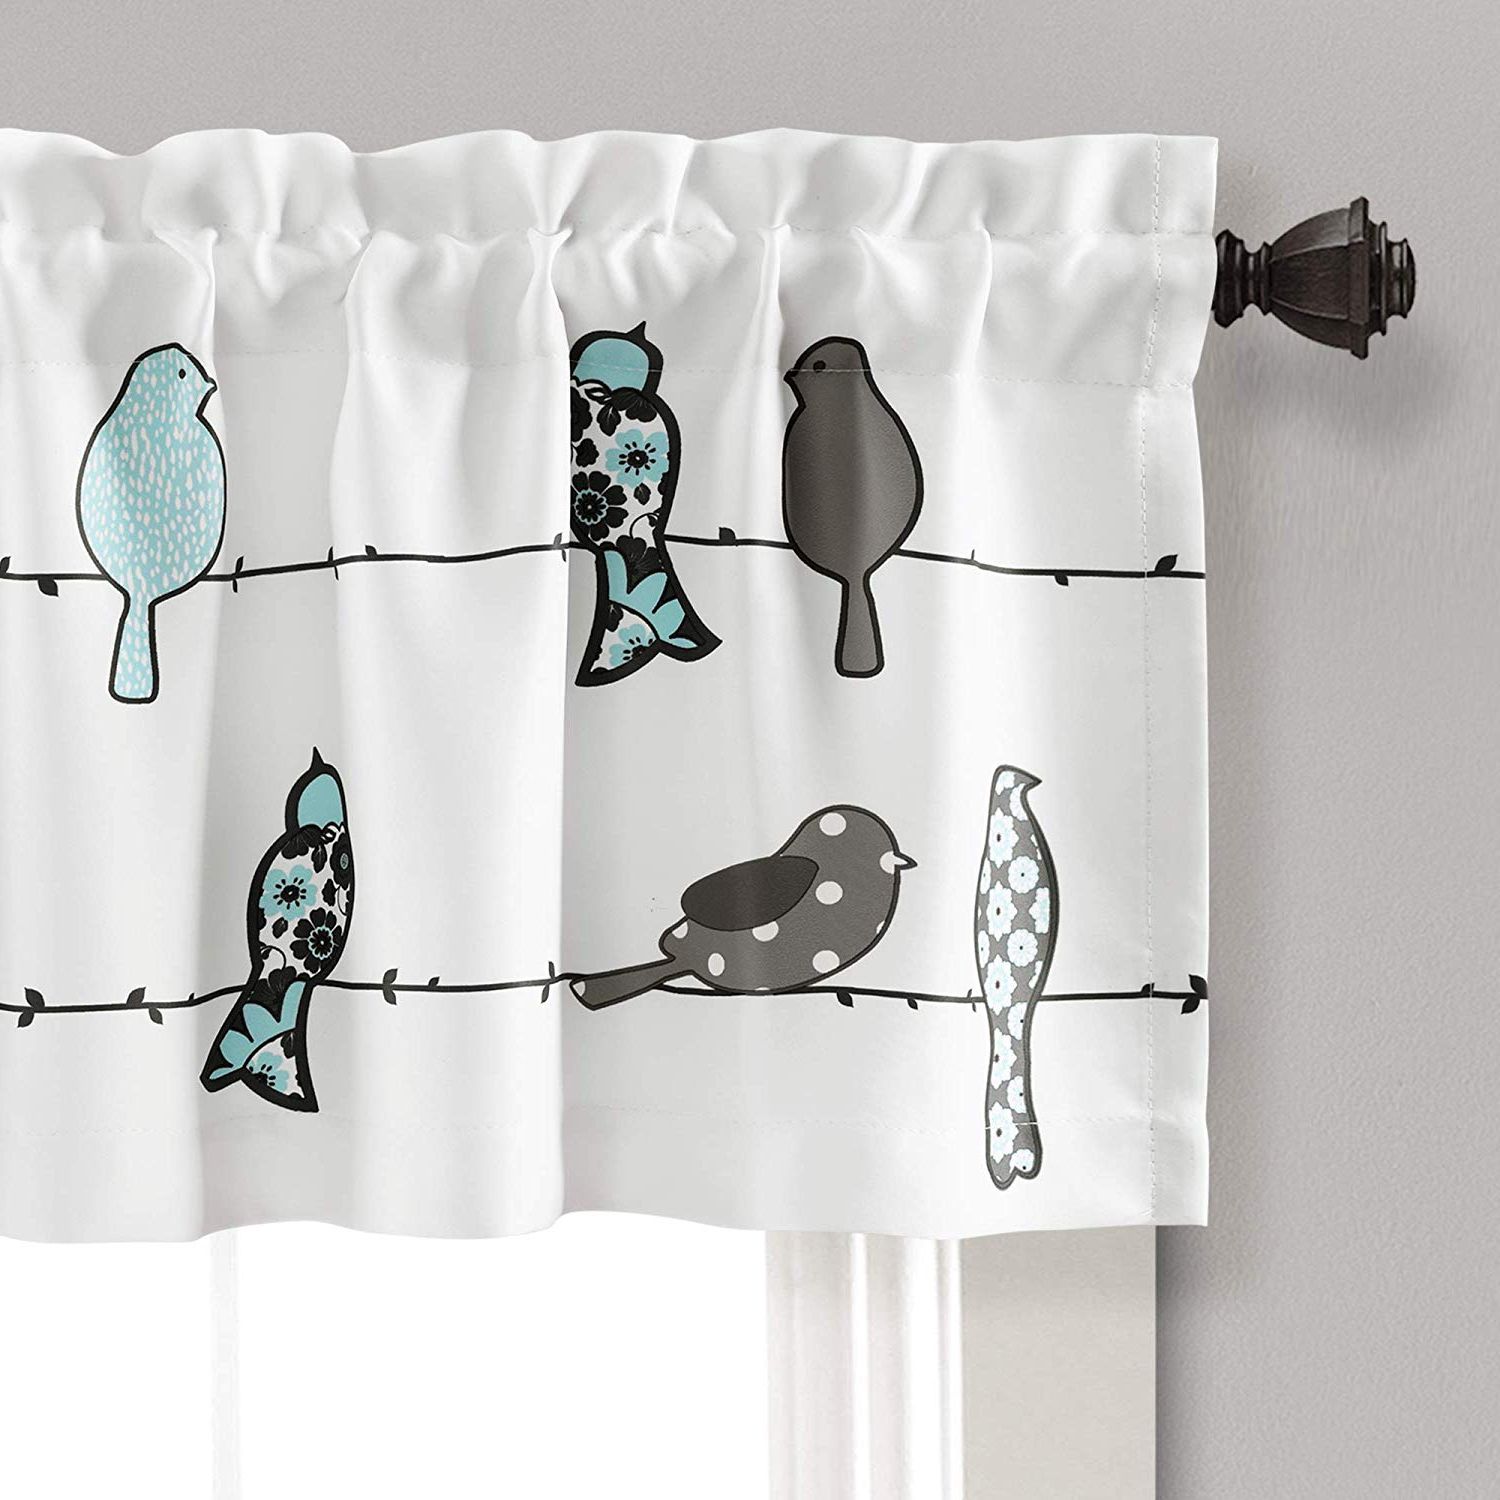 Latest Lush Decor Rowley Birds Curtain Valance (single Panel), 18” X 52”, Blue And  Gray, L, Blue & Gray Throughout Rowley Birds Valances (View 1 of 20)